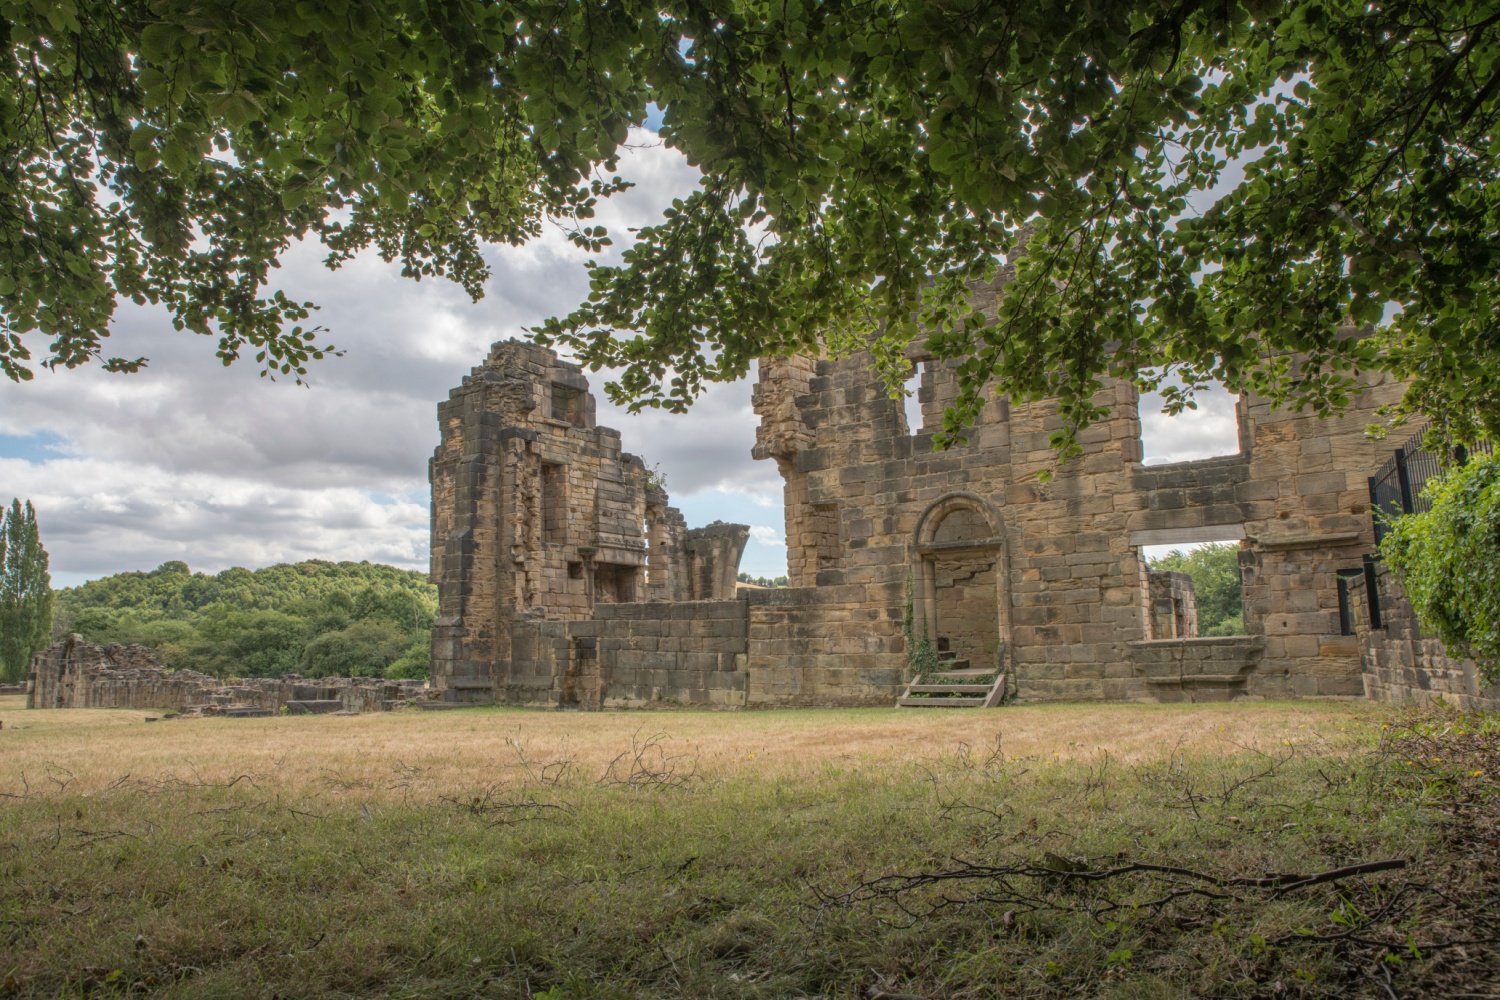 Image name monk bretton priory barnsley south yorkshire the 4 image from the post A look at the history of Monk Bretton Priory, Barnsley, with Dr Emma Wells in Yorkshire.com.